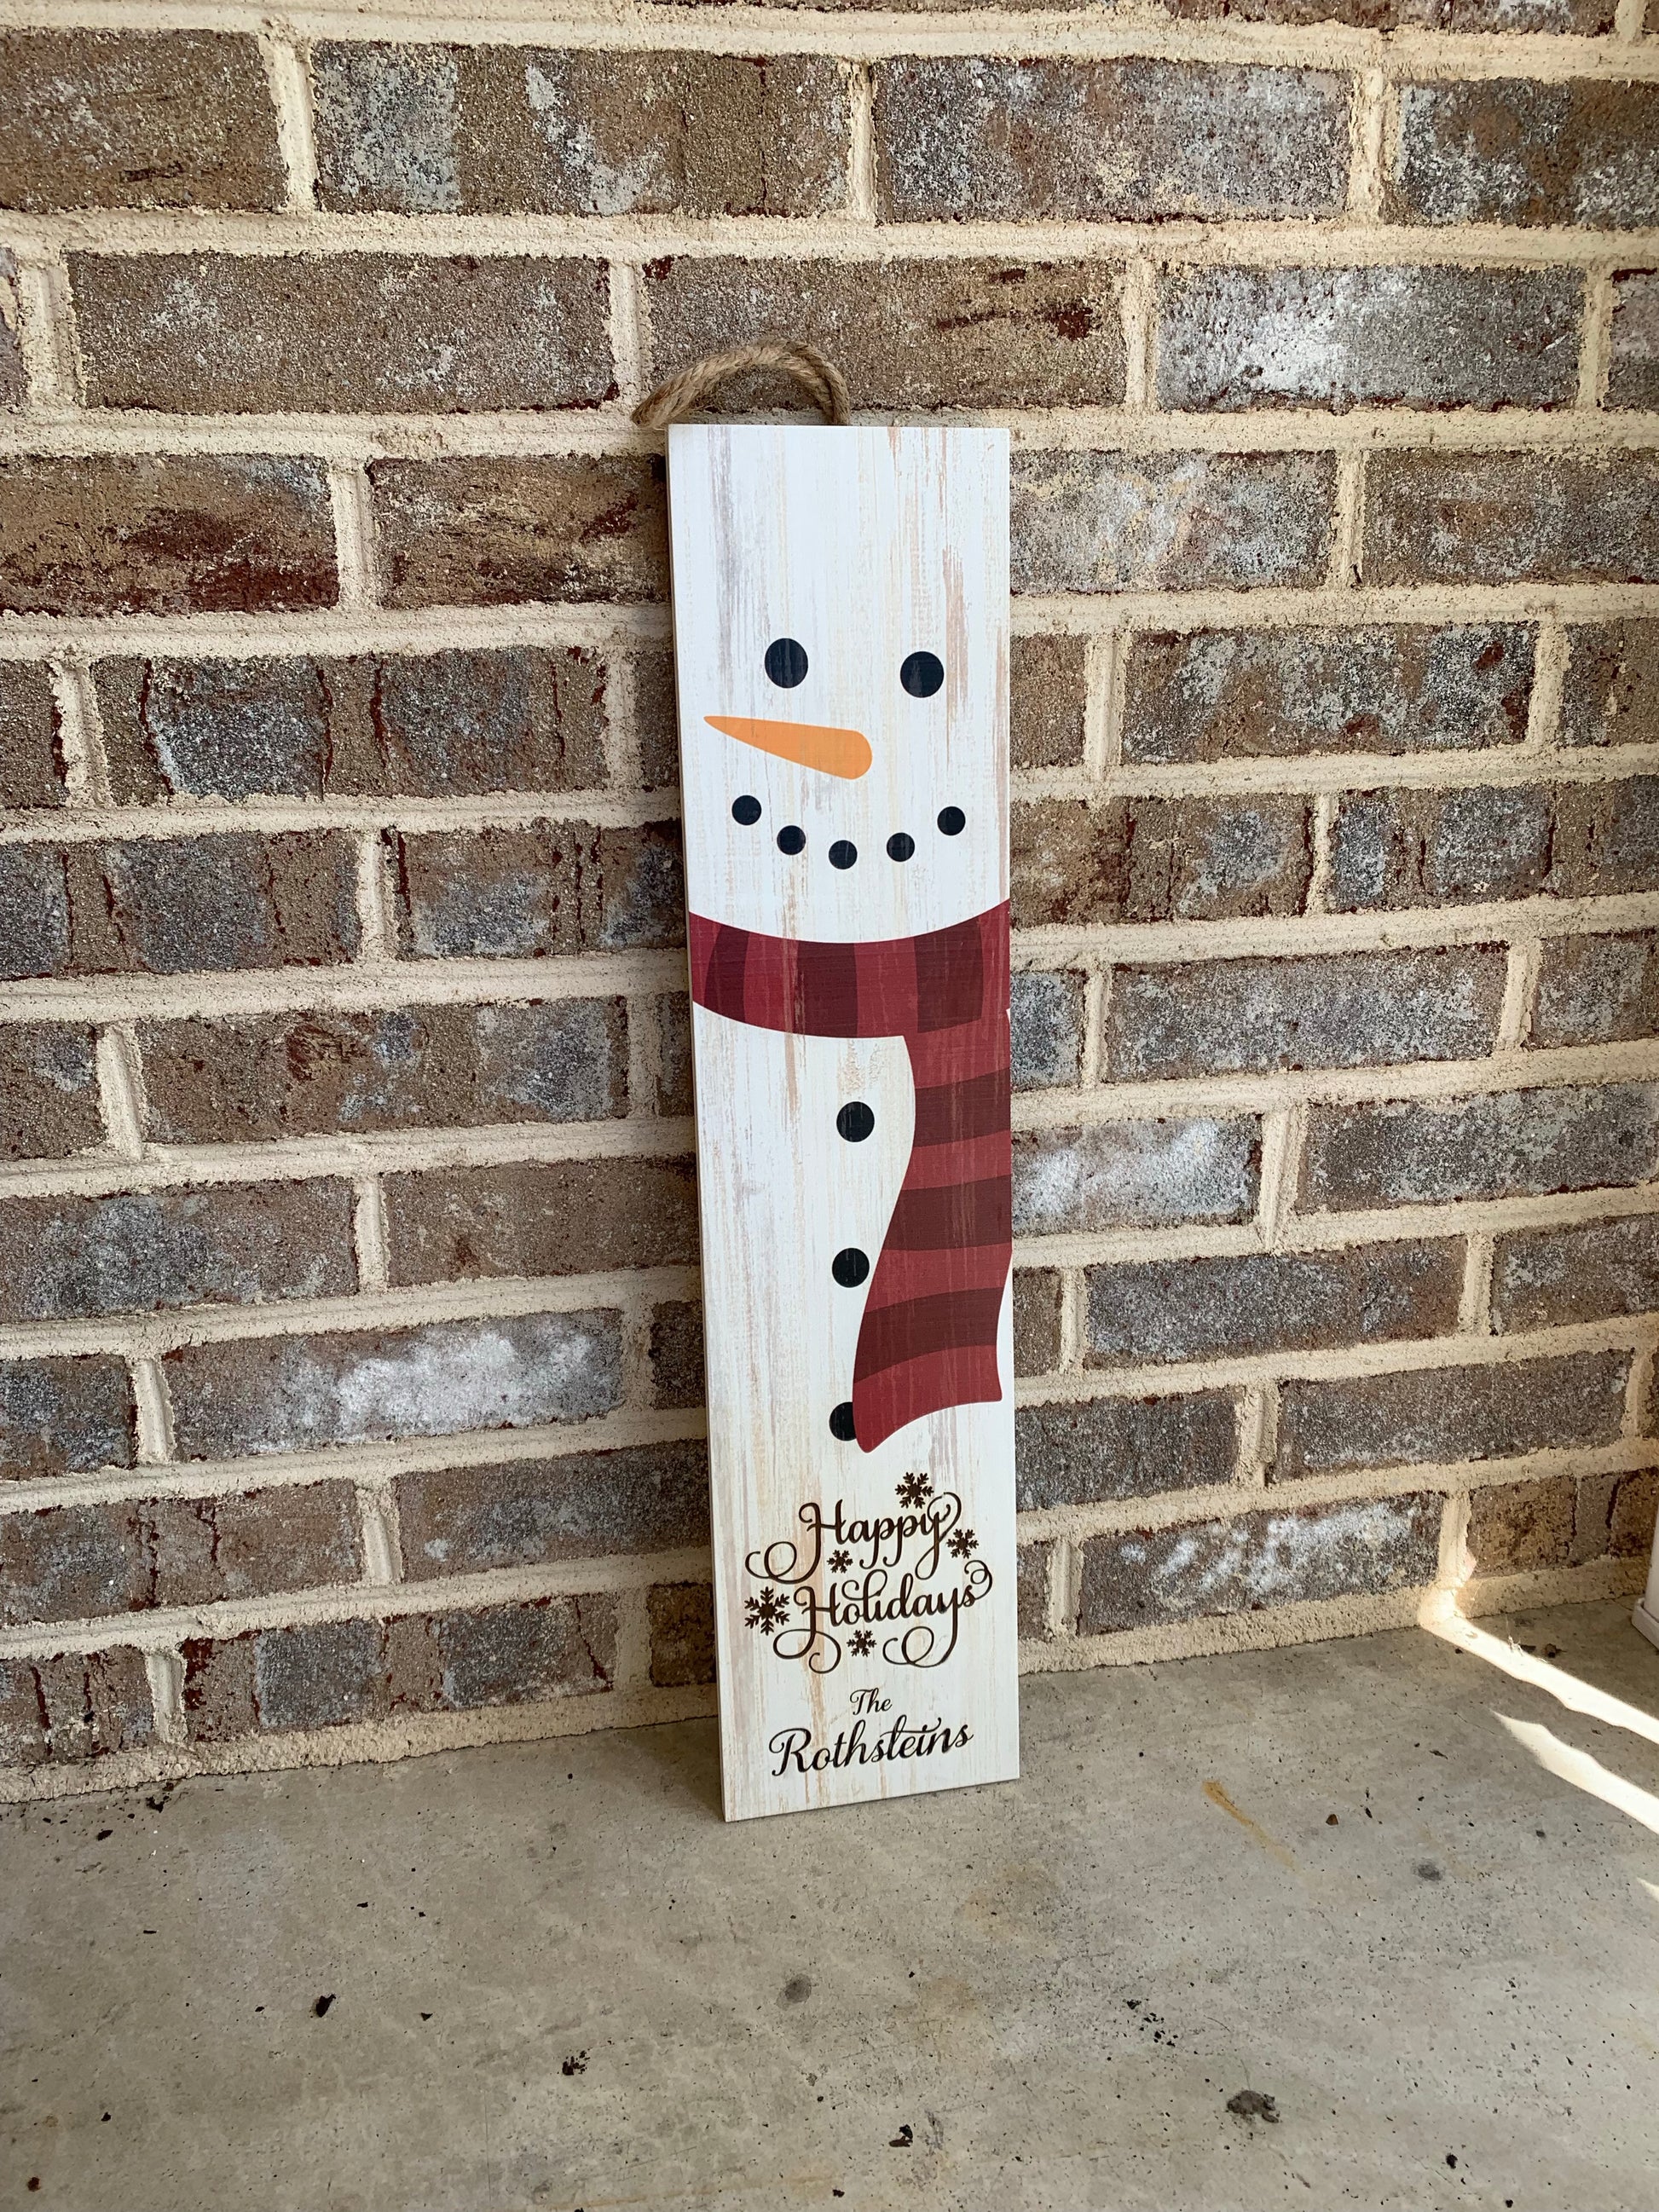 Personalized Porch Sign/Door Hanger Snowman Christmas Ornament - MixMatched Creations